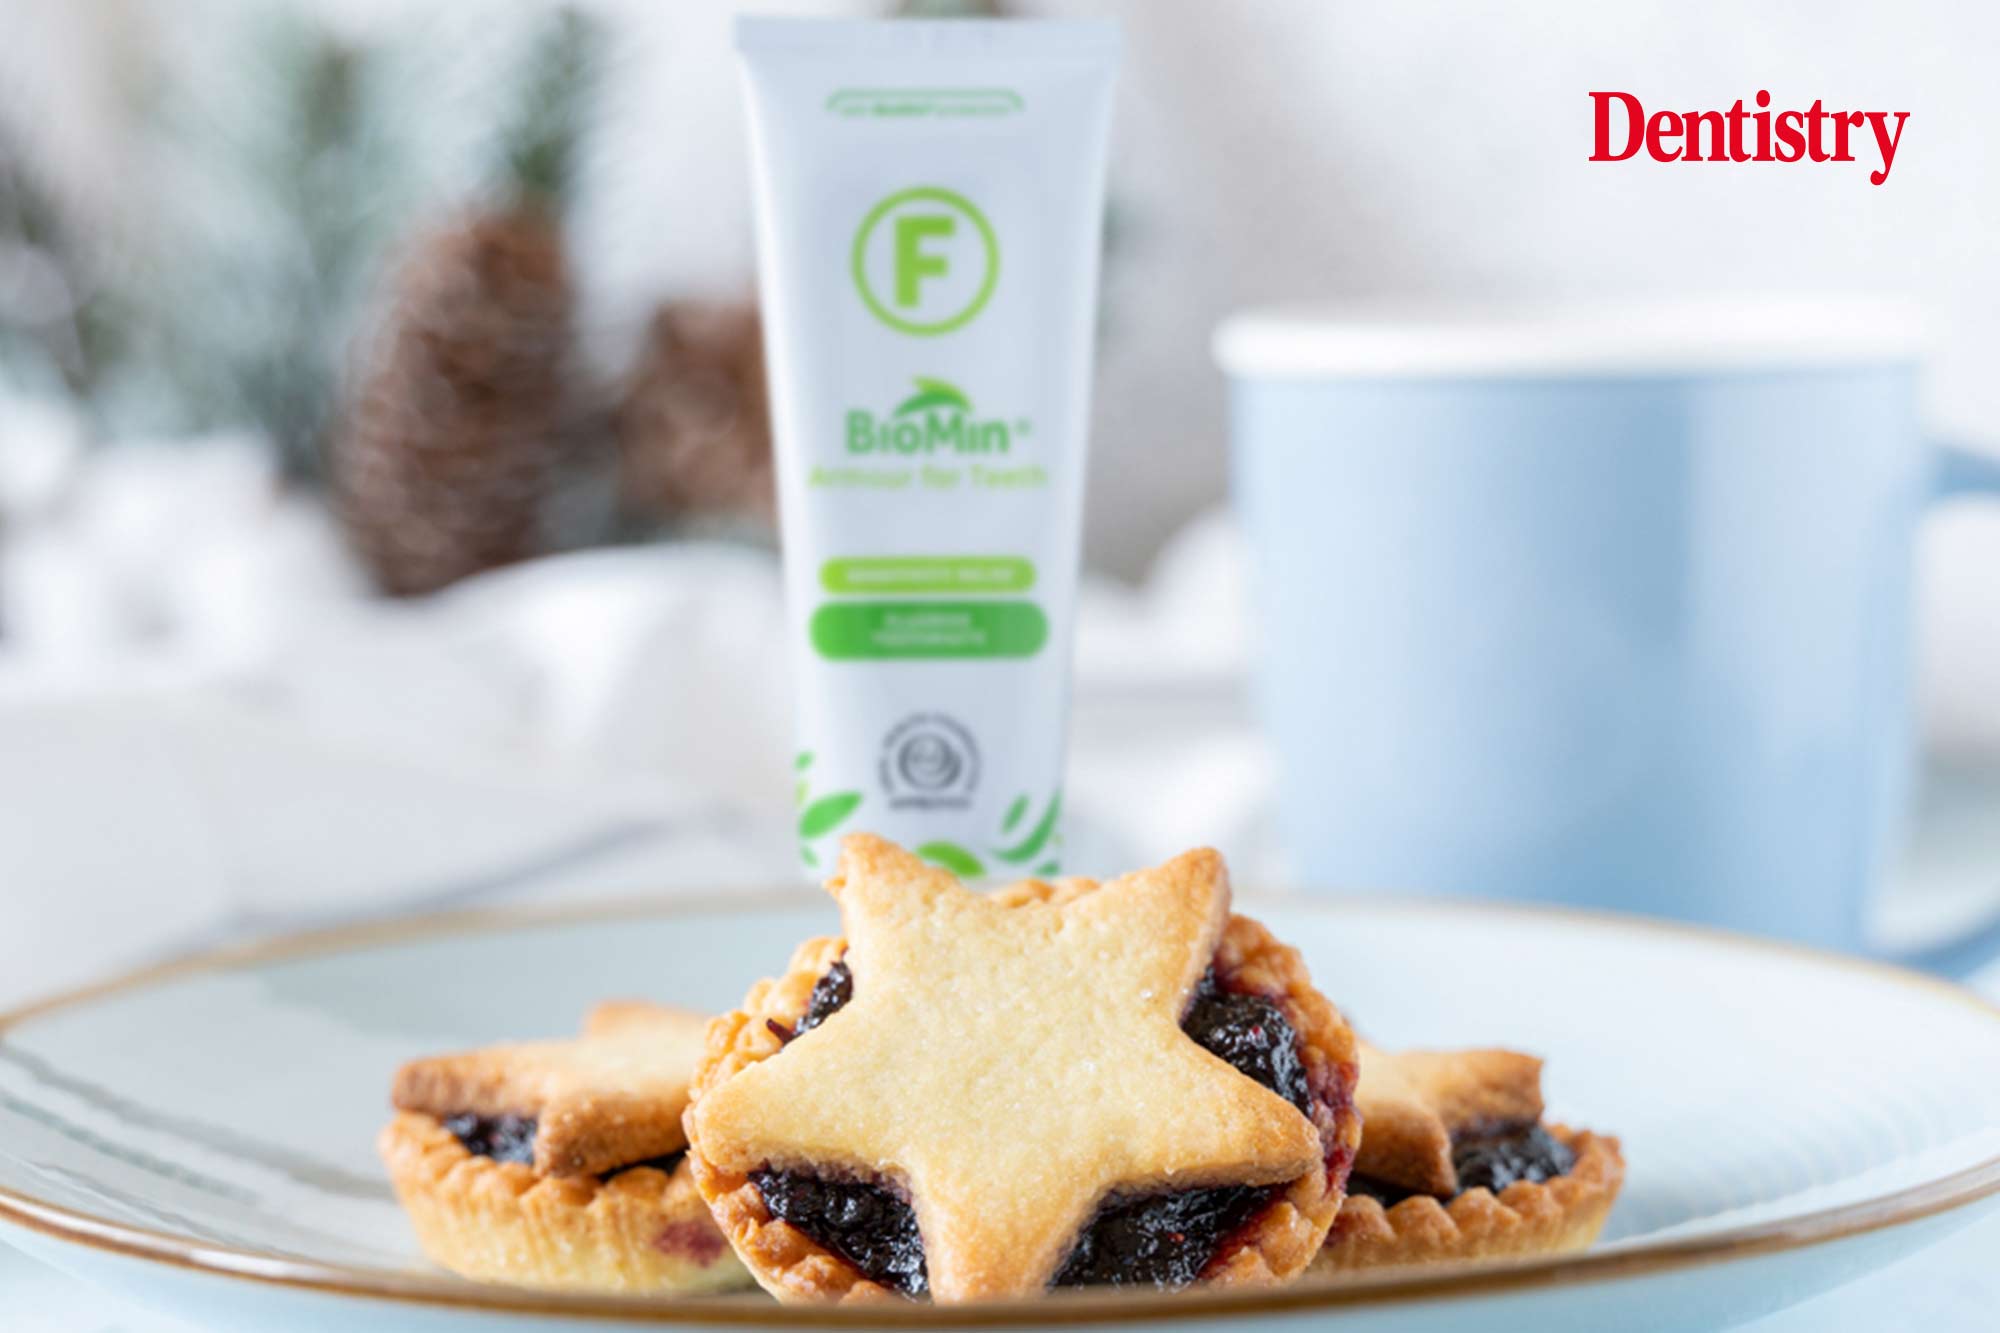 Give your teeth a festive treat this Christmas with Biomin F